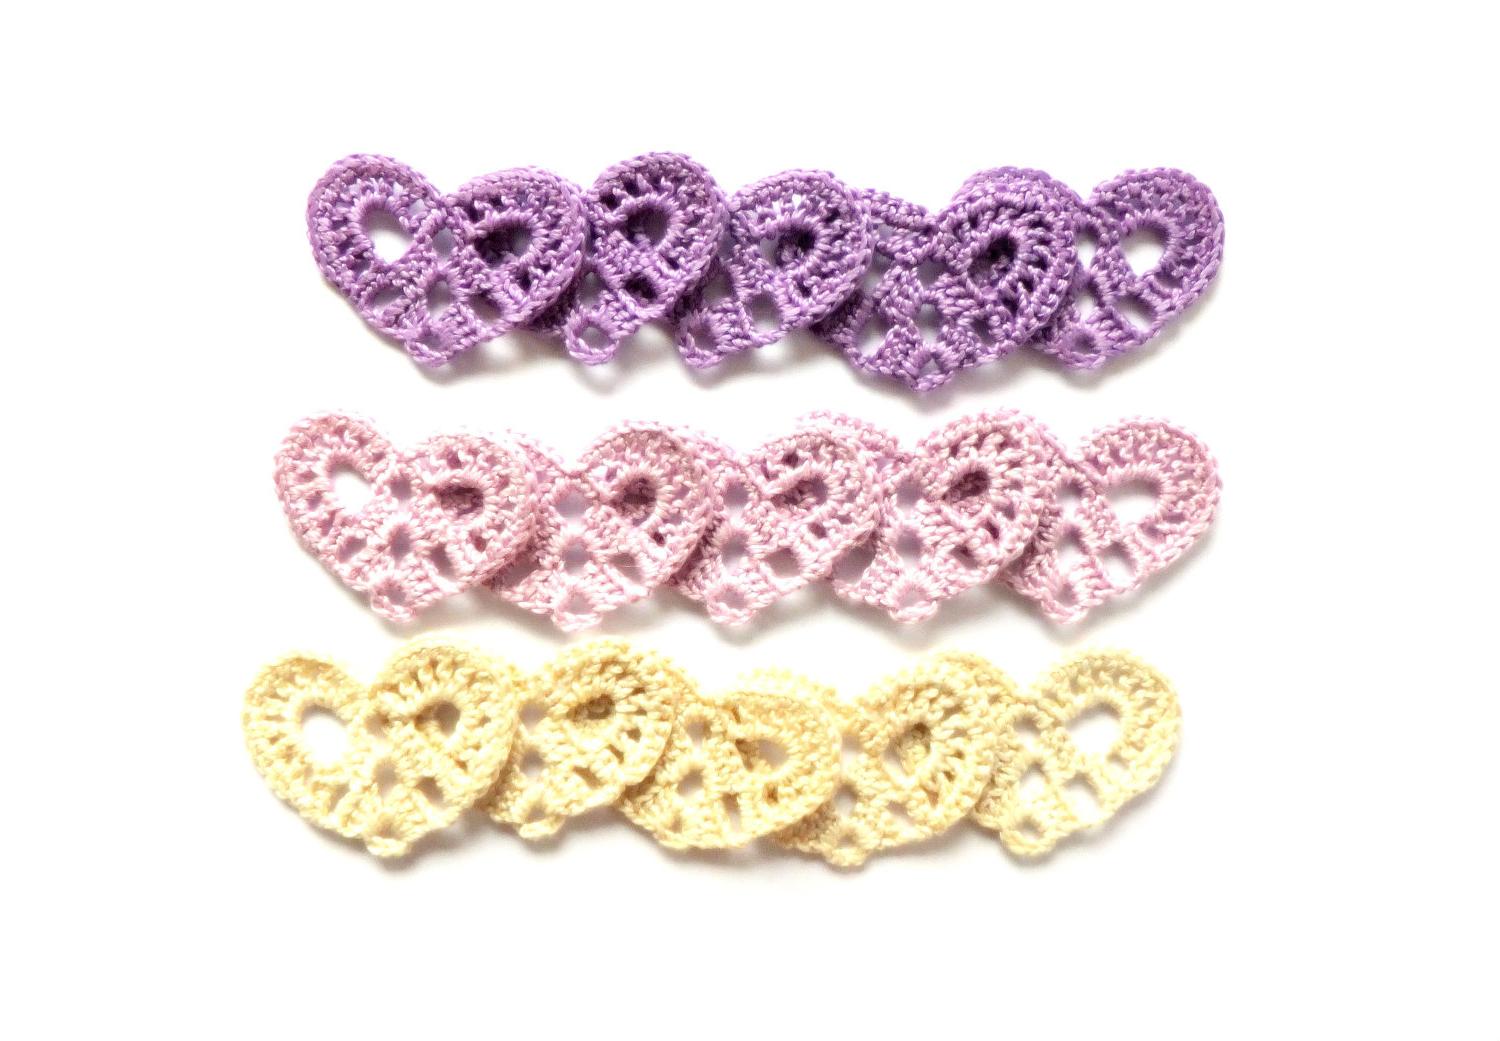 Crocheted small hearts - lavender Wedding decorations, favors, applique,